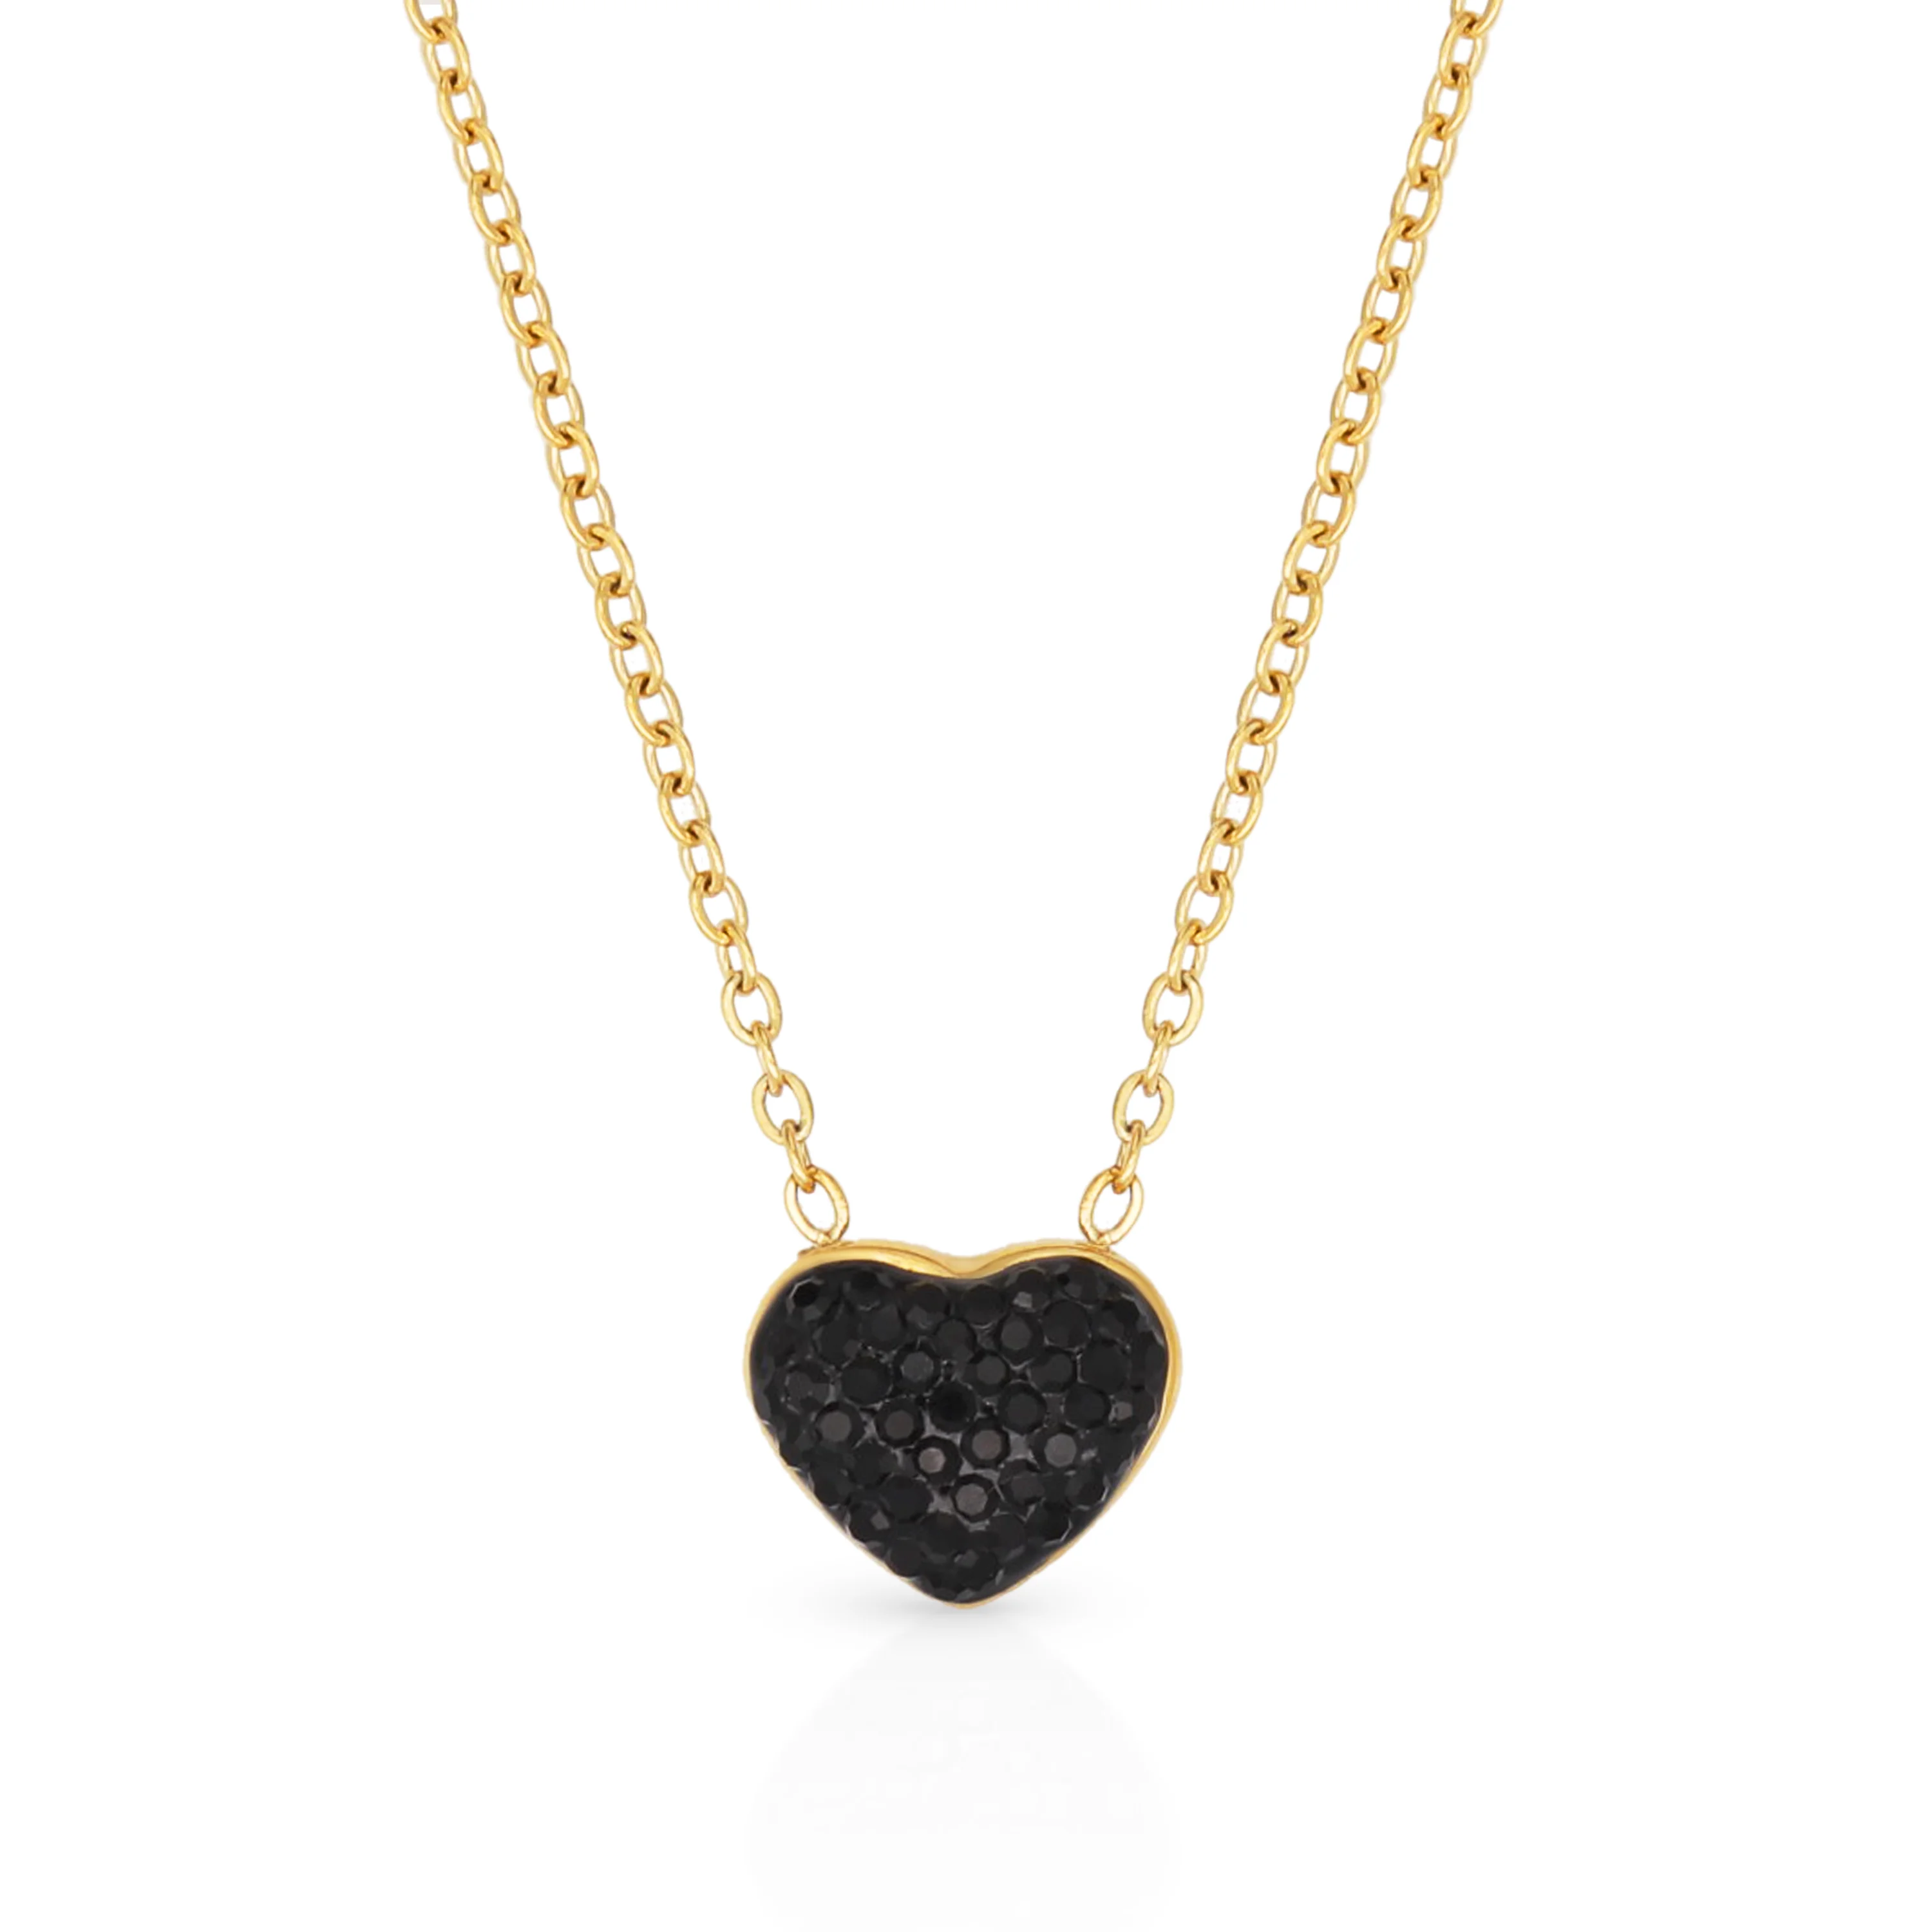 

Chris April 18k PVD gold plated 316L stainless steel vintage heart pendant black onyx bejeweled charm necklace